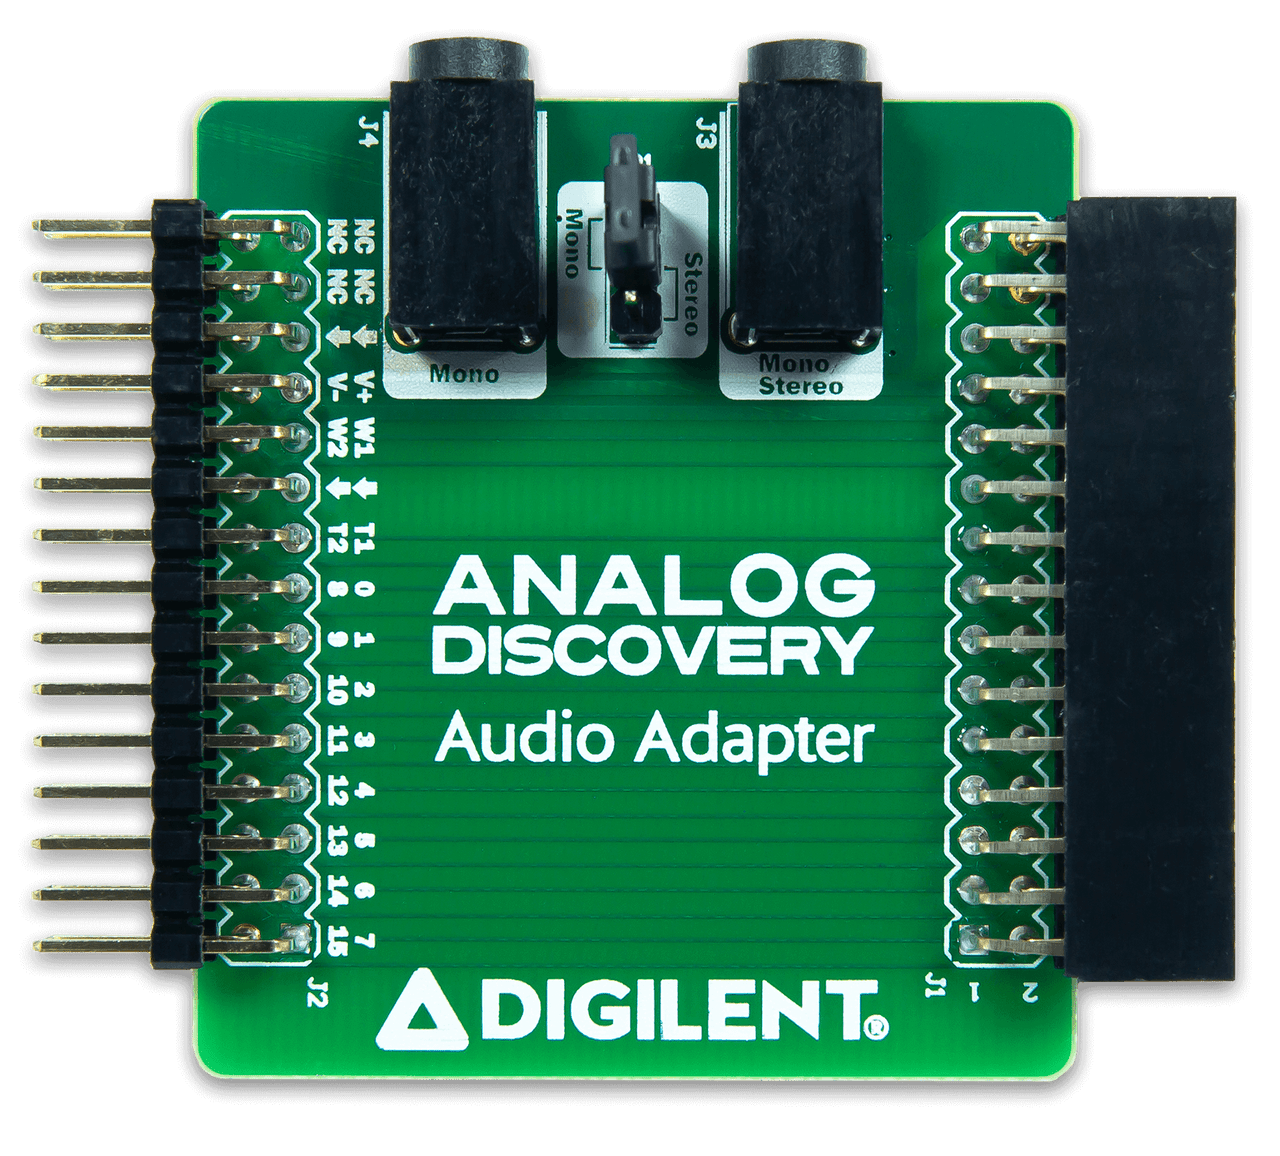 Avenue Zoologisk have Bære Audio Adapter for Analog Discovery - Digilent